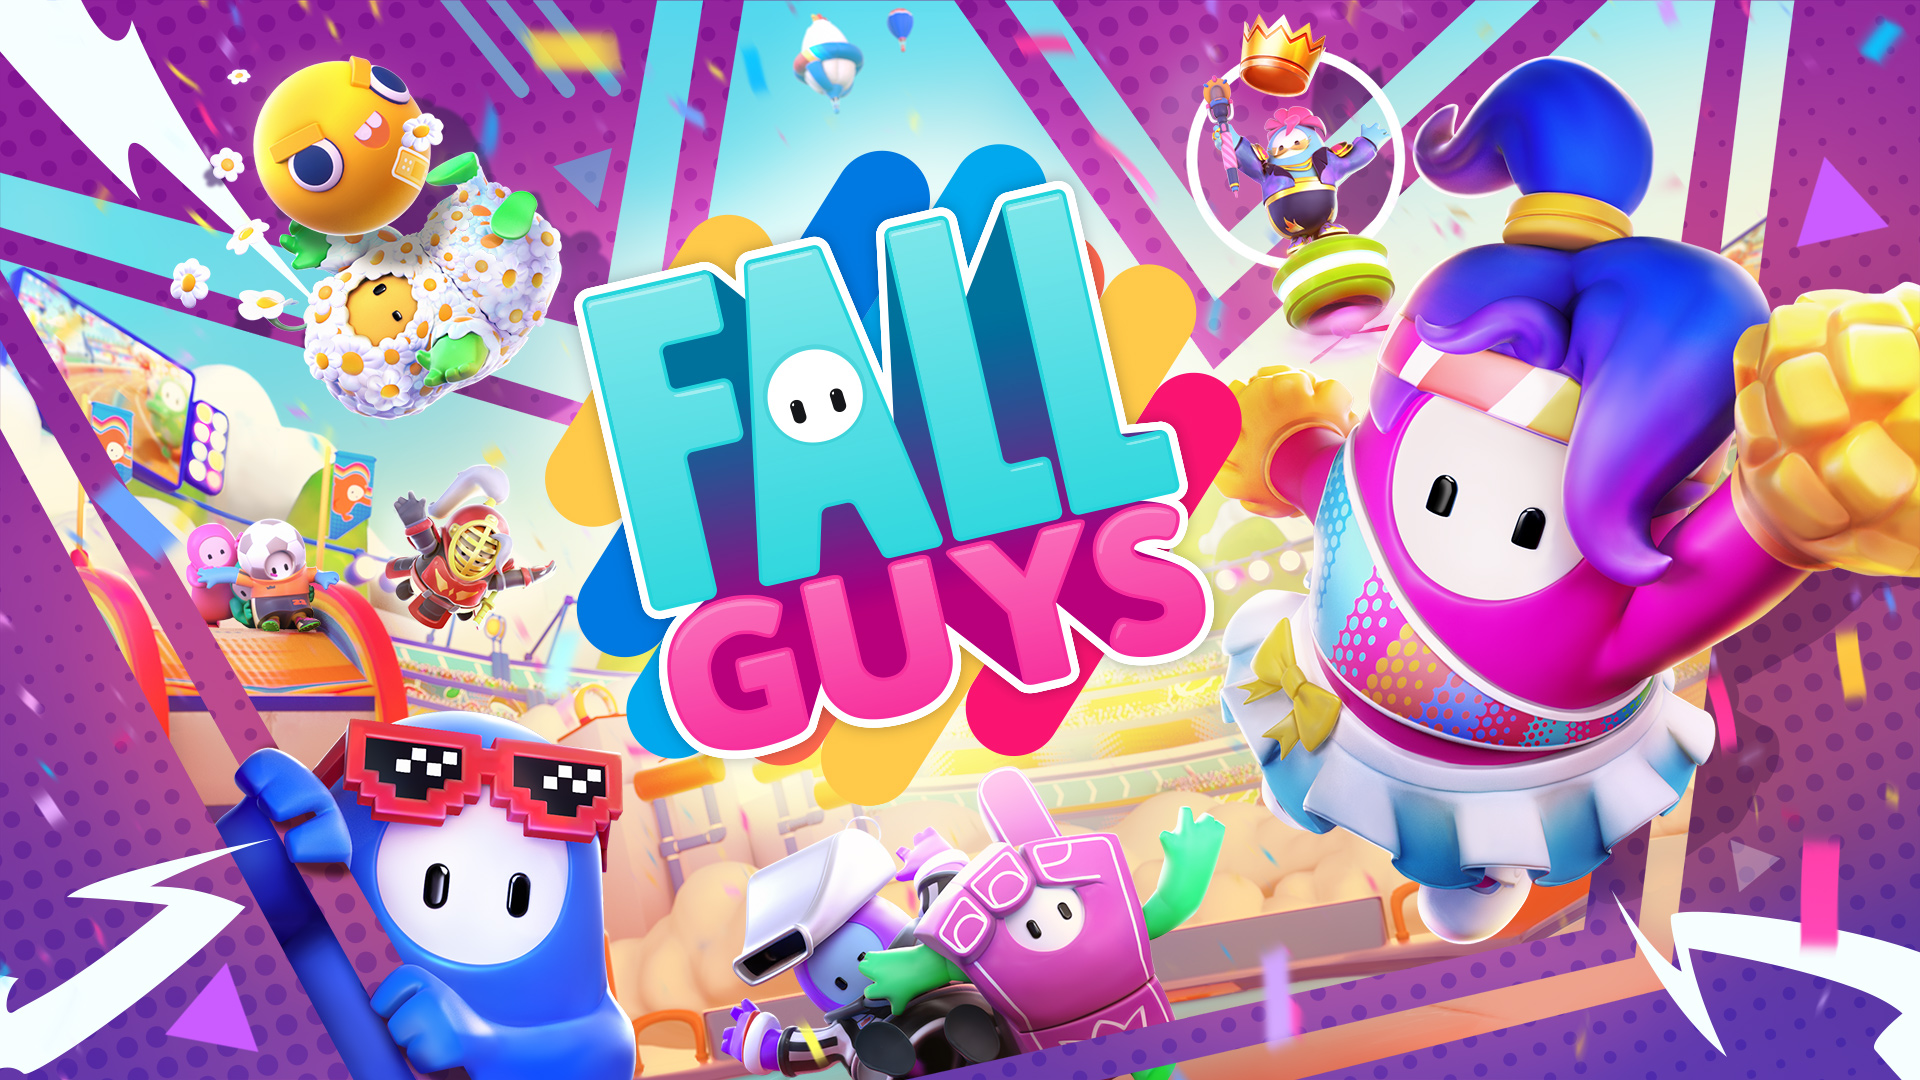 Fall Guys Free For All Hits Xbox June 21st - Xbox Wire